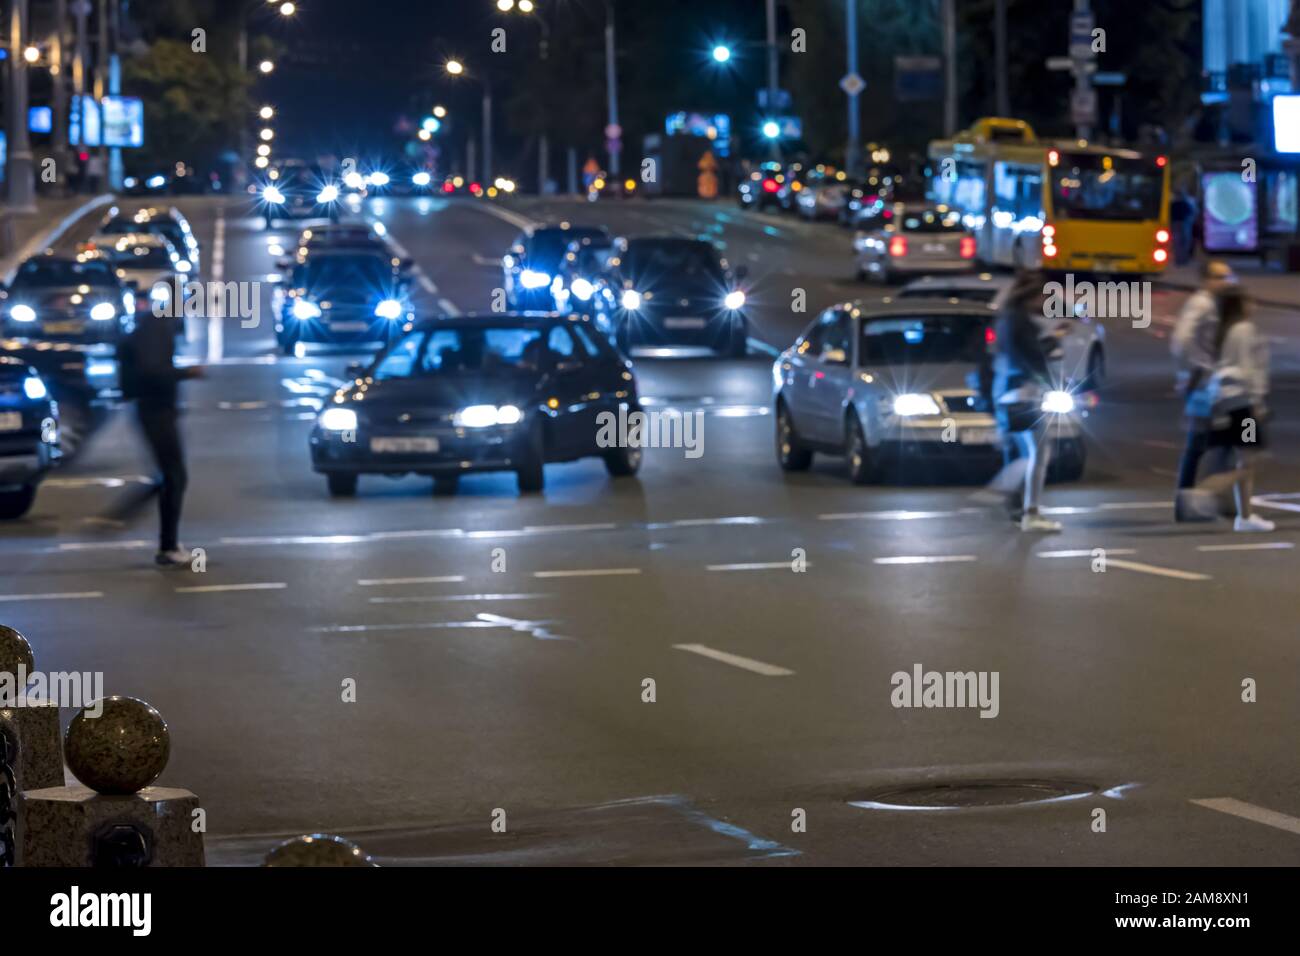 people walking over crossroad on night city street. blurred image Stock Photo